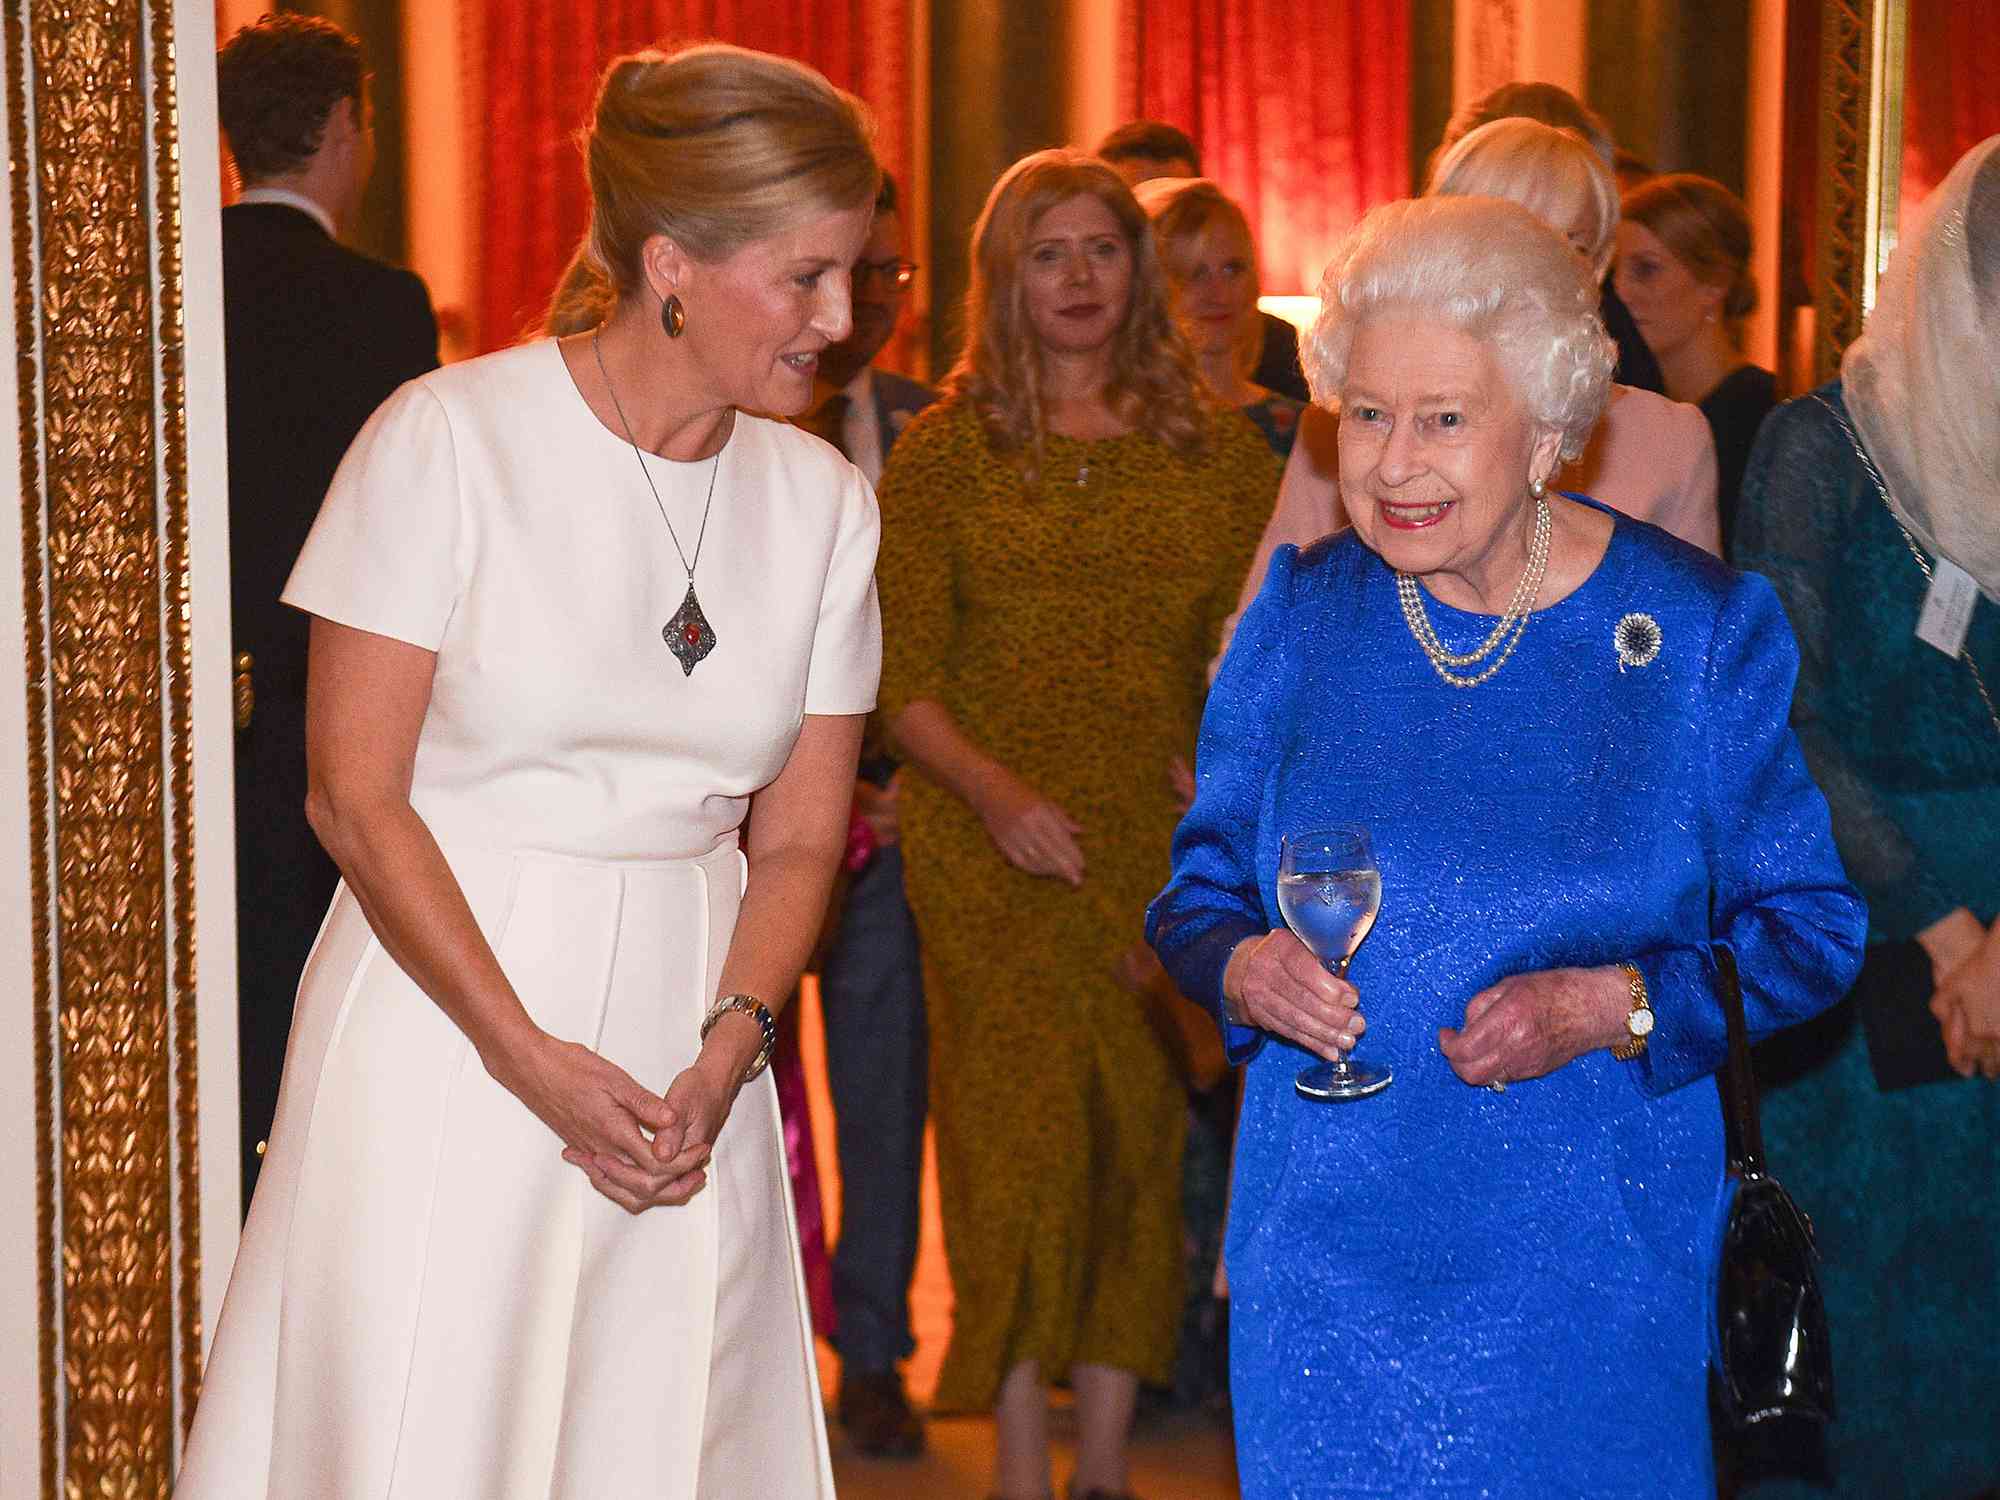 Queen Elizabeth II and Sophie, Countess of Wessex attend a reception to celebrate the work of the Queen Elizabeth Diamond Jubilee Trust at Buckingham Palace on October 29, 2019 in London, England